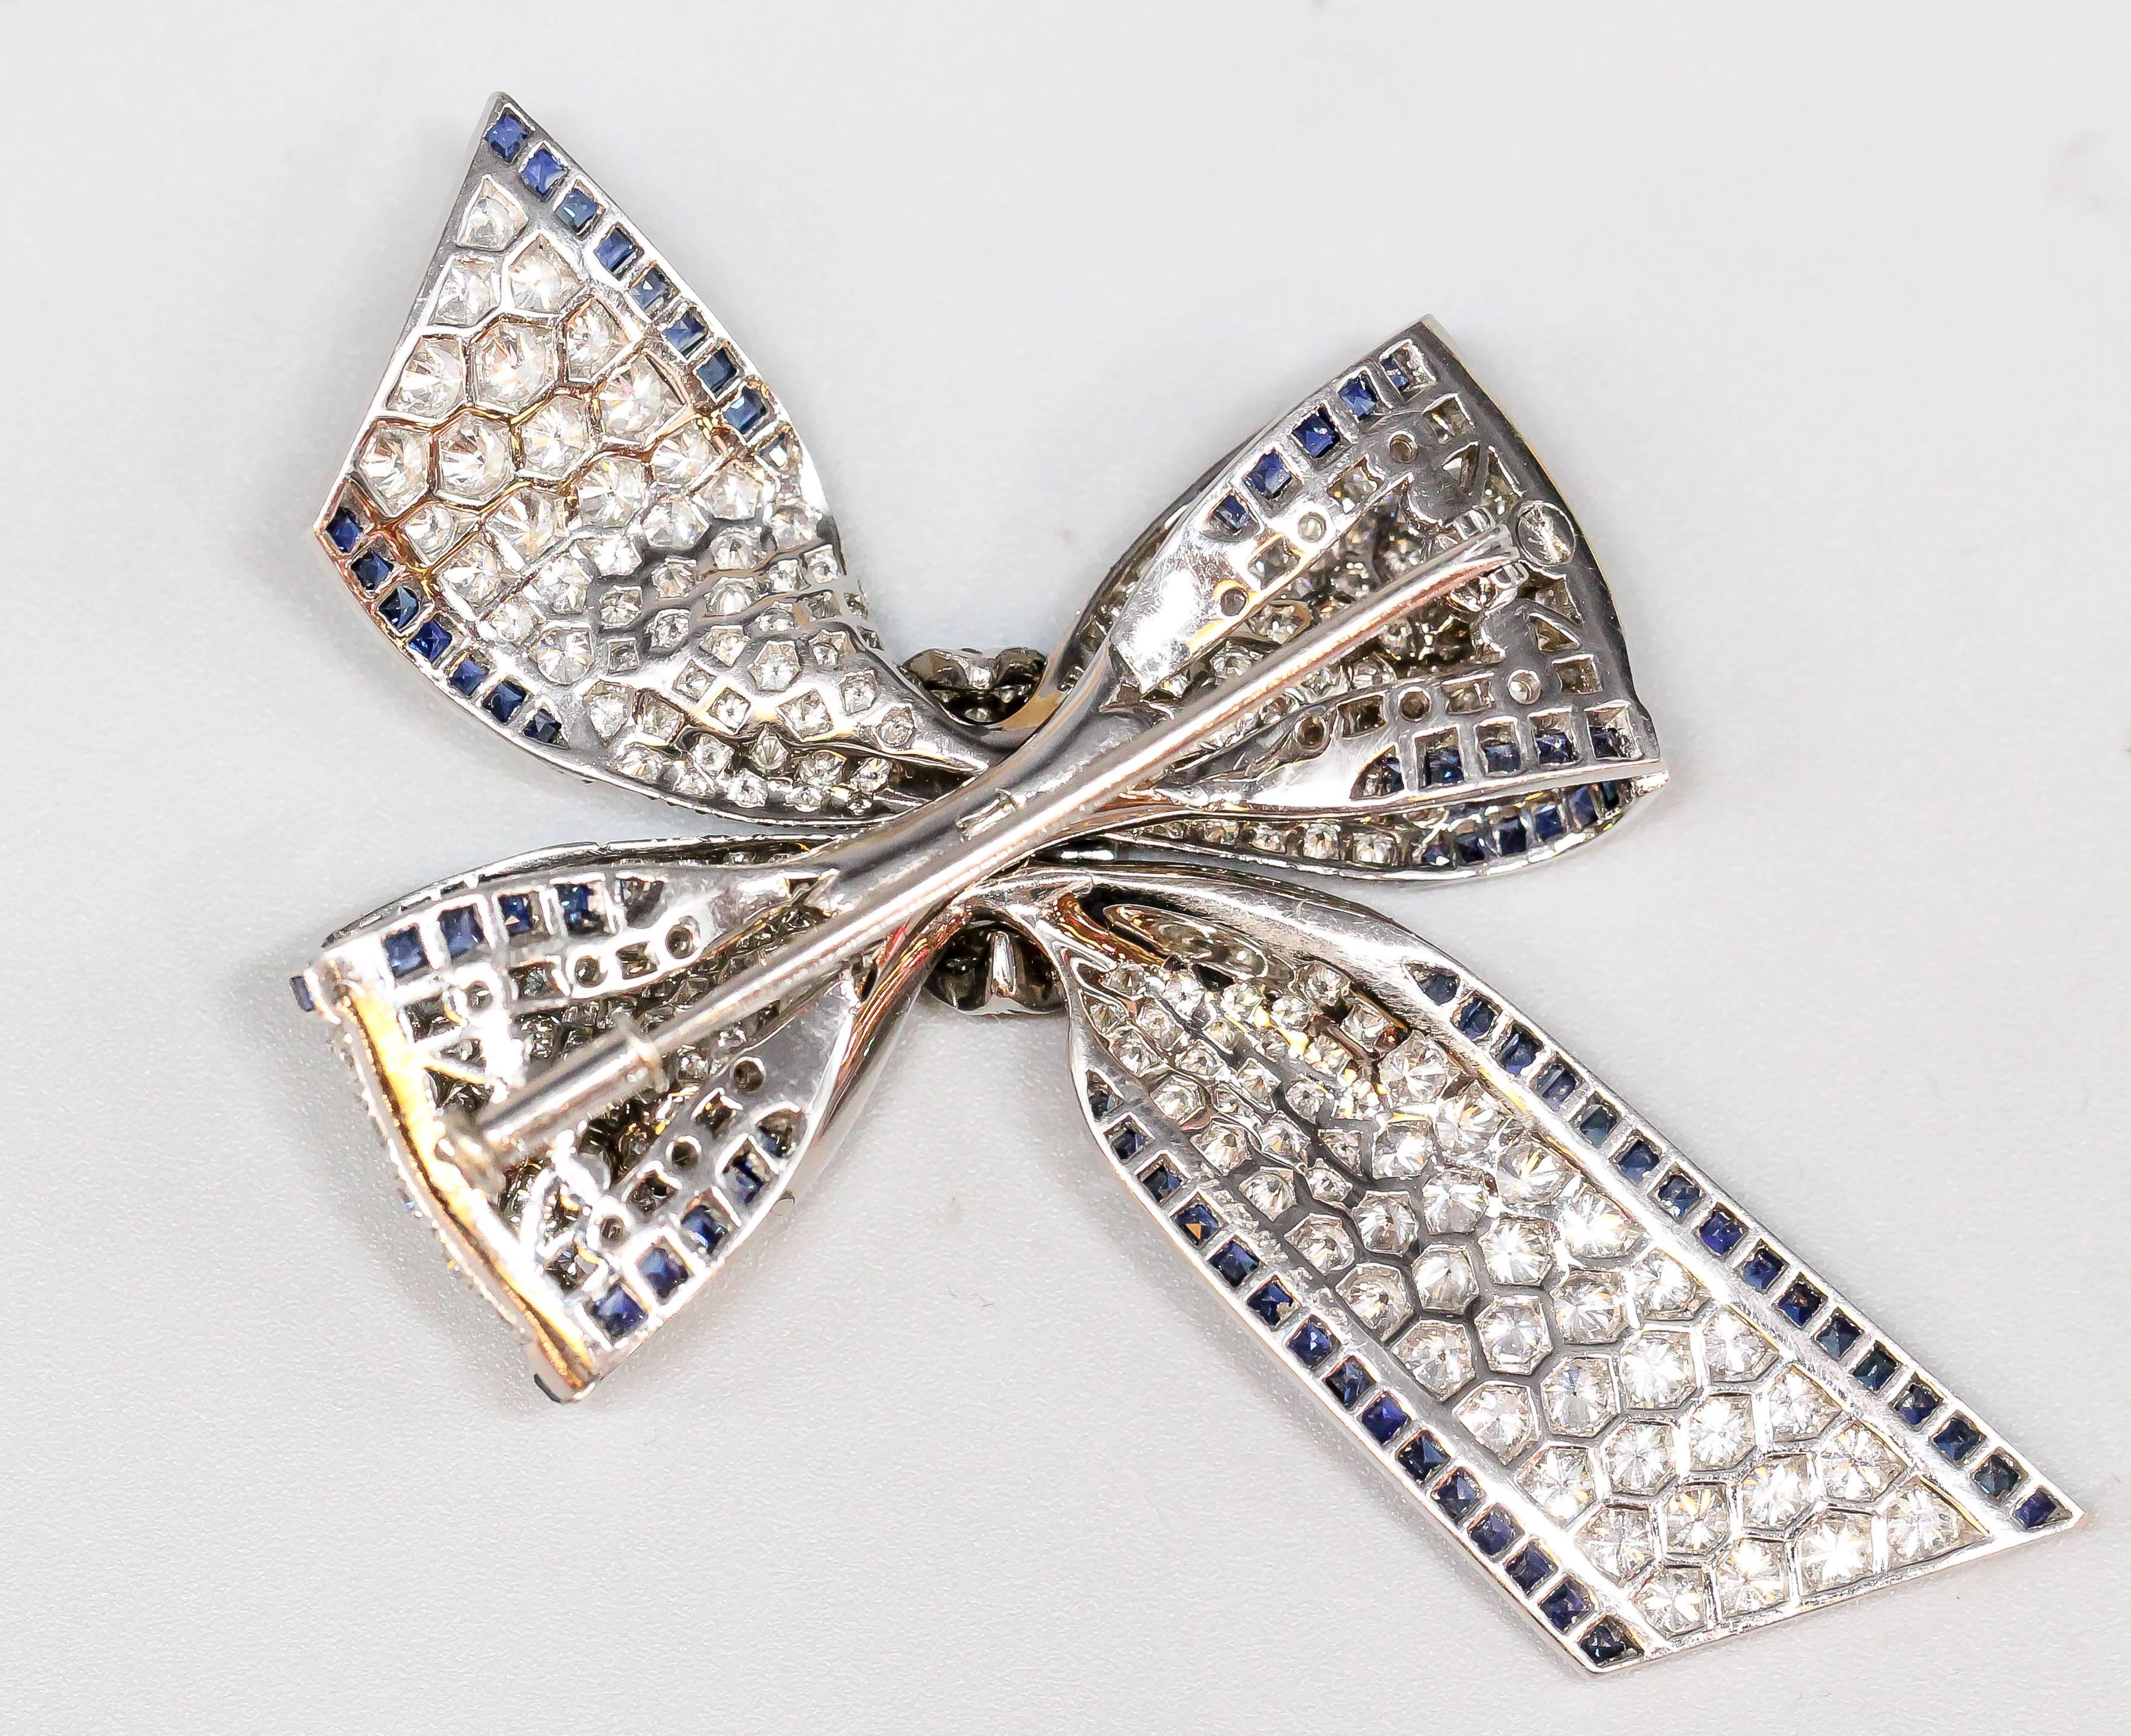 Chic brooch in the form of a bow, by Tiffany & Co. circa 1970s.  The wonderful brooch features a lifelike design, with calibre cut sapphire edges and a diamond pave.  This item consists of over 7 carats of high grade diamonds and sapphires. 